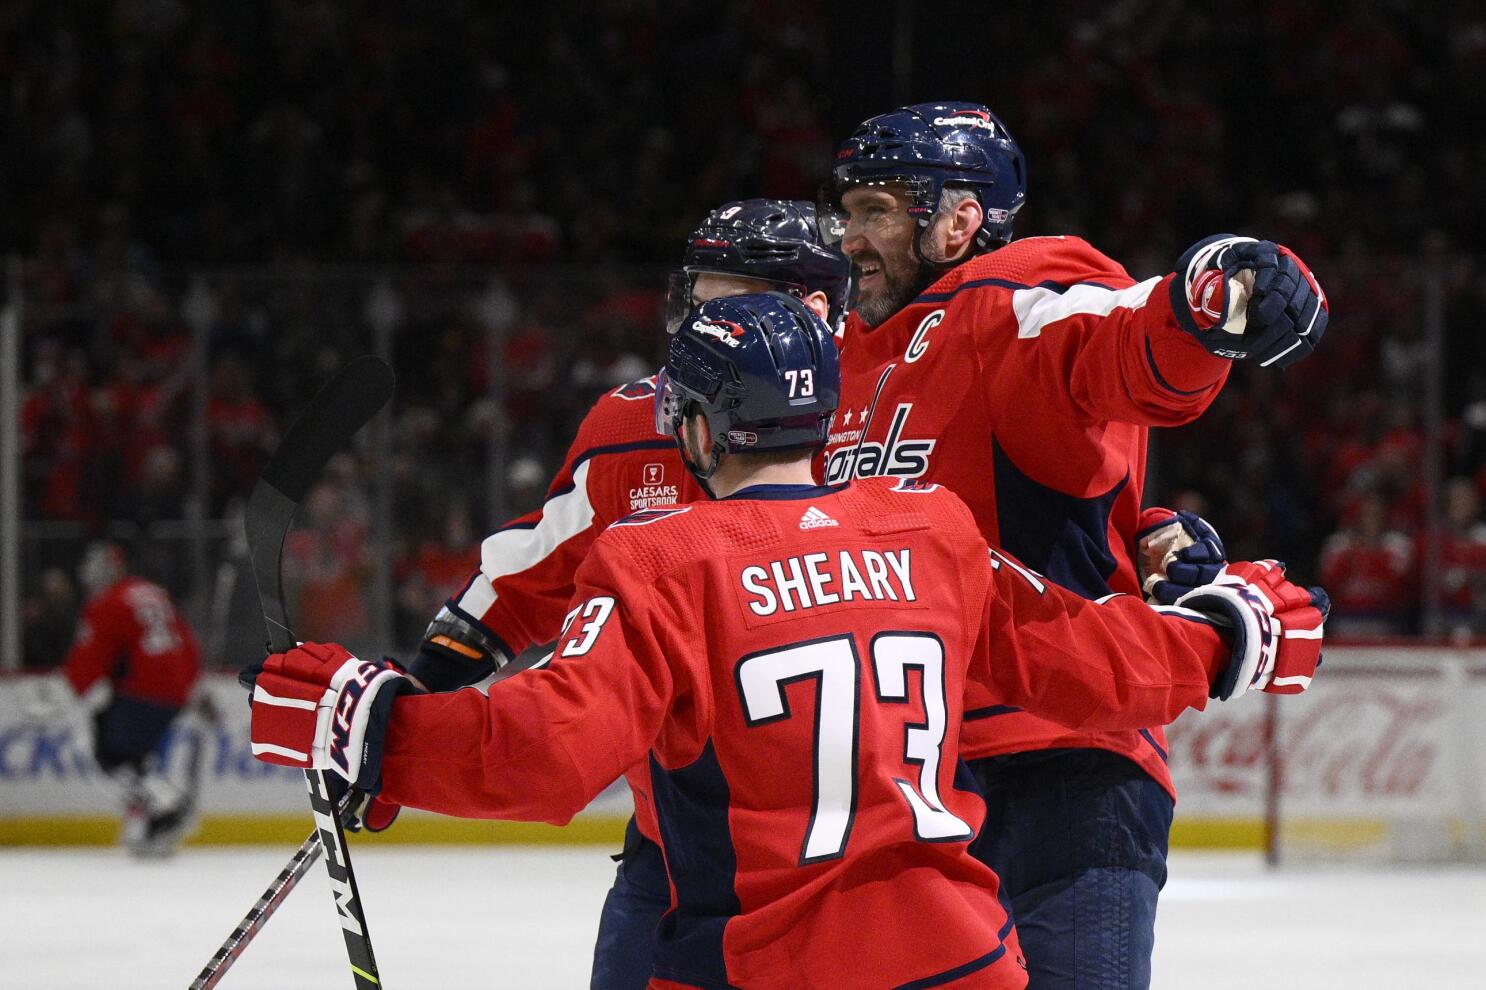 Ovechkin, Backstrom's KHL team wins Cup